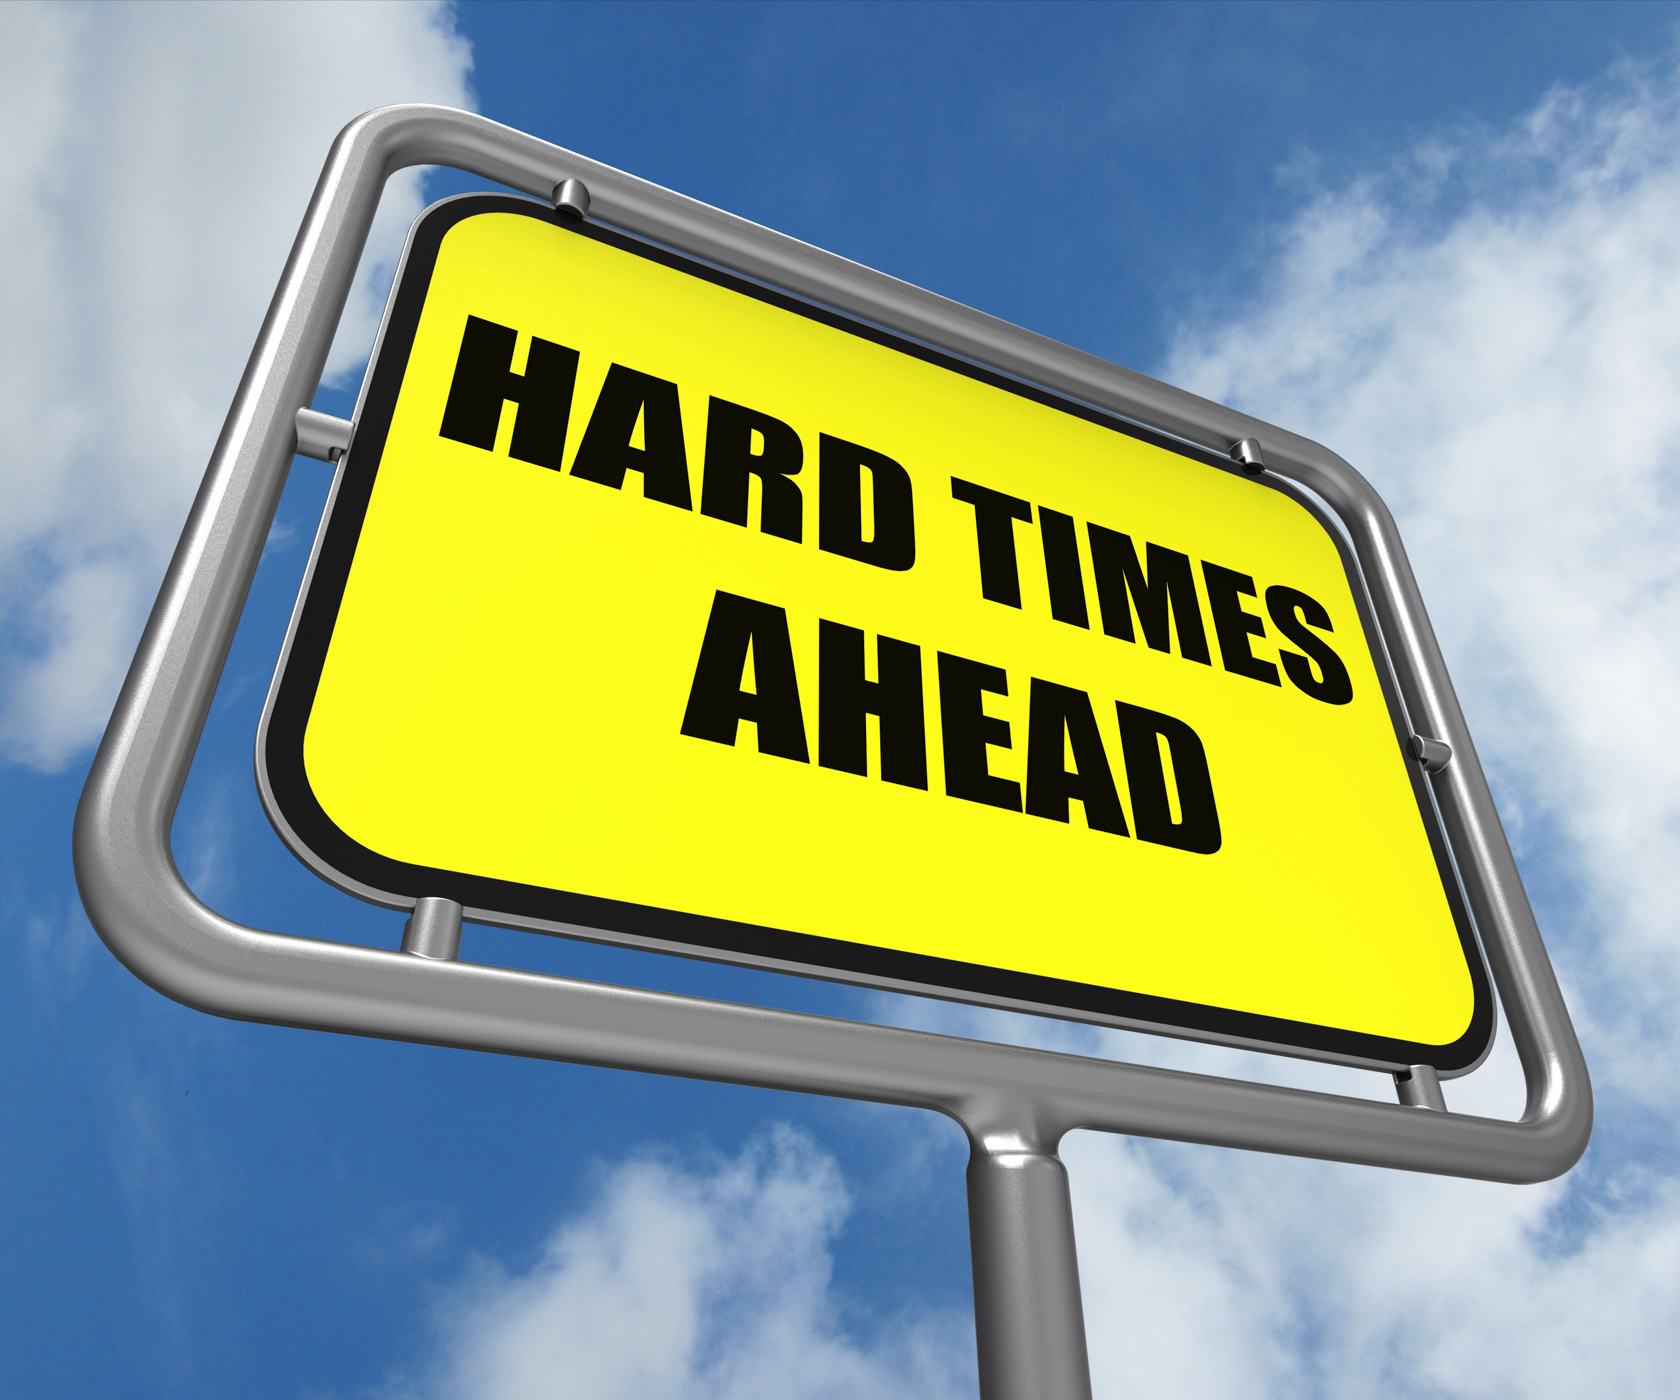 Hard Times Ahead Sign Means Tough Hardship and Difficulties Warning, Ahead, Risk, Tough, Times, HQ Photo